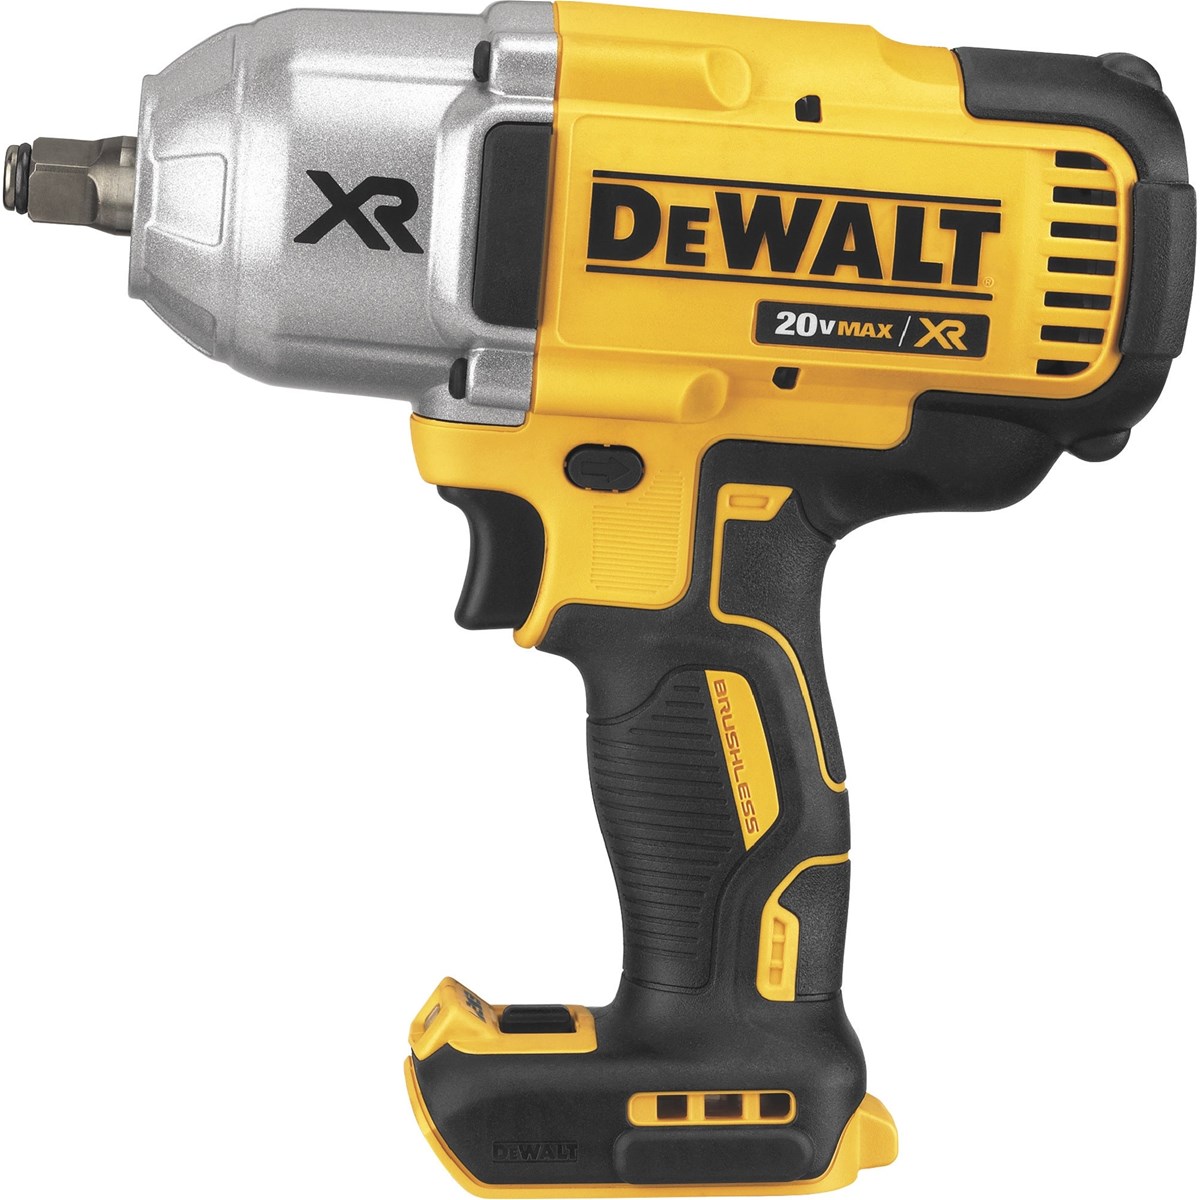 DeWalt DCF899HB 20V Max High Torque 12in Impact Wrench with Hog Ring Anvil Tool Only